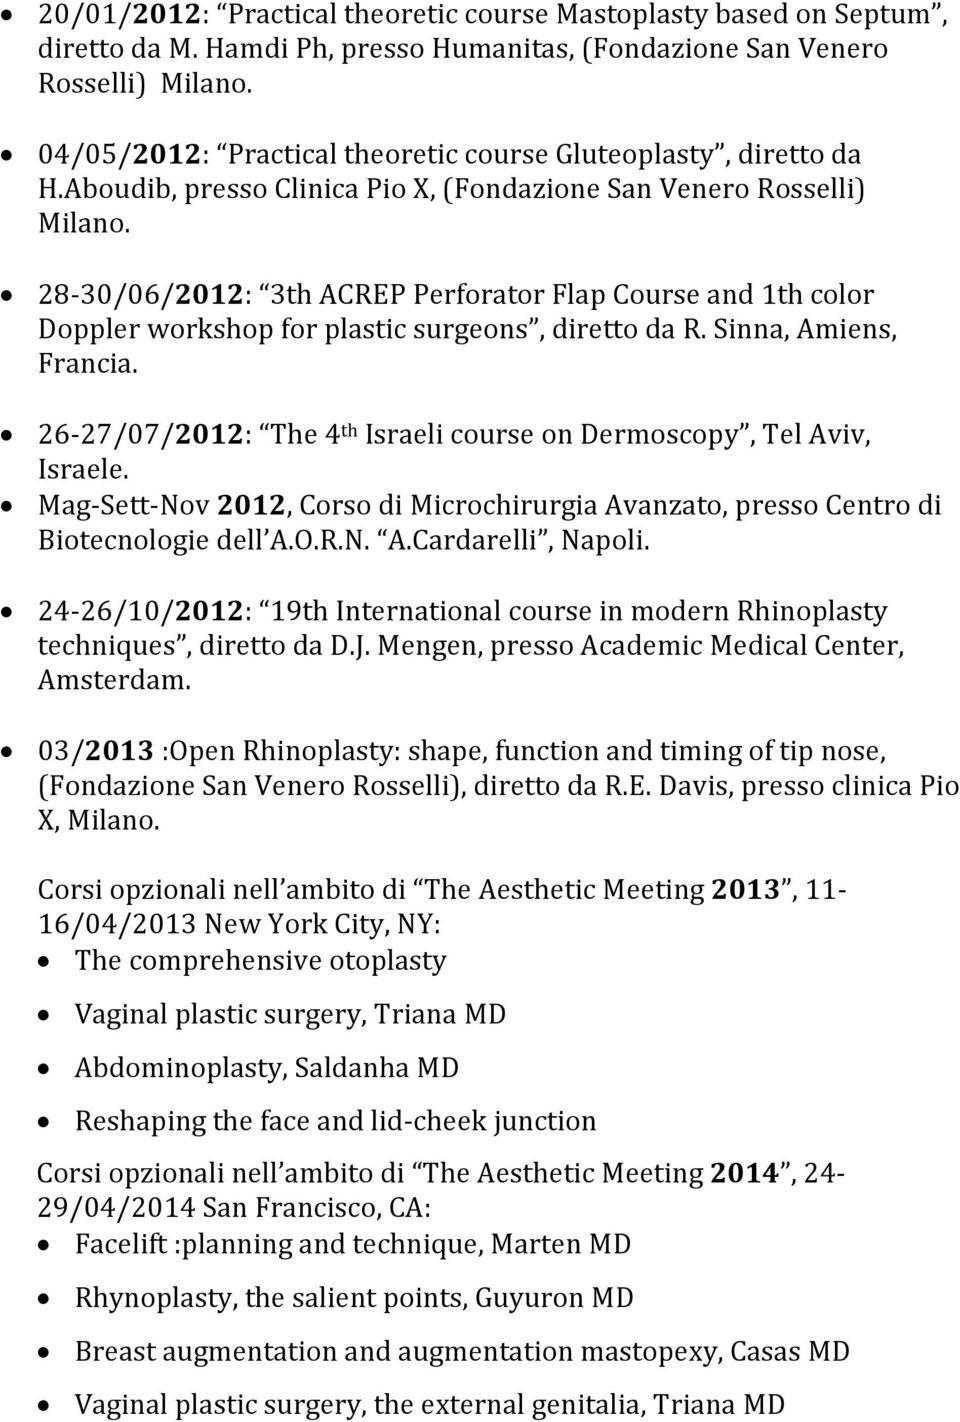 28-30/06/2012: 3th ACREP Perforator Flap Course and 1th color Doppler workshop for plastic surgeons, diretto da R. Sinna, Amiens, Francia.